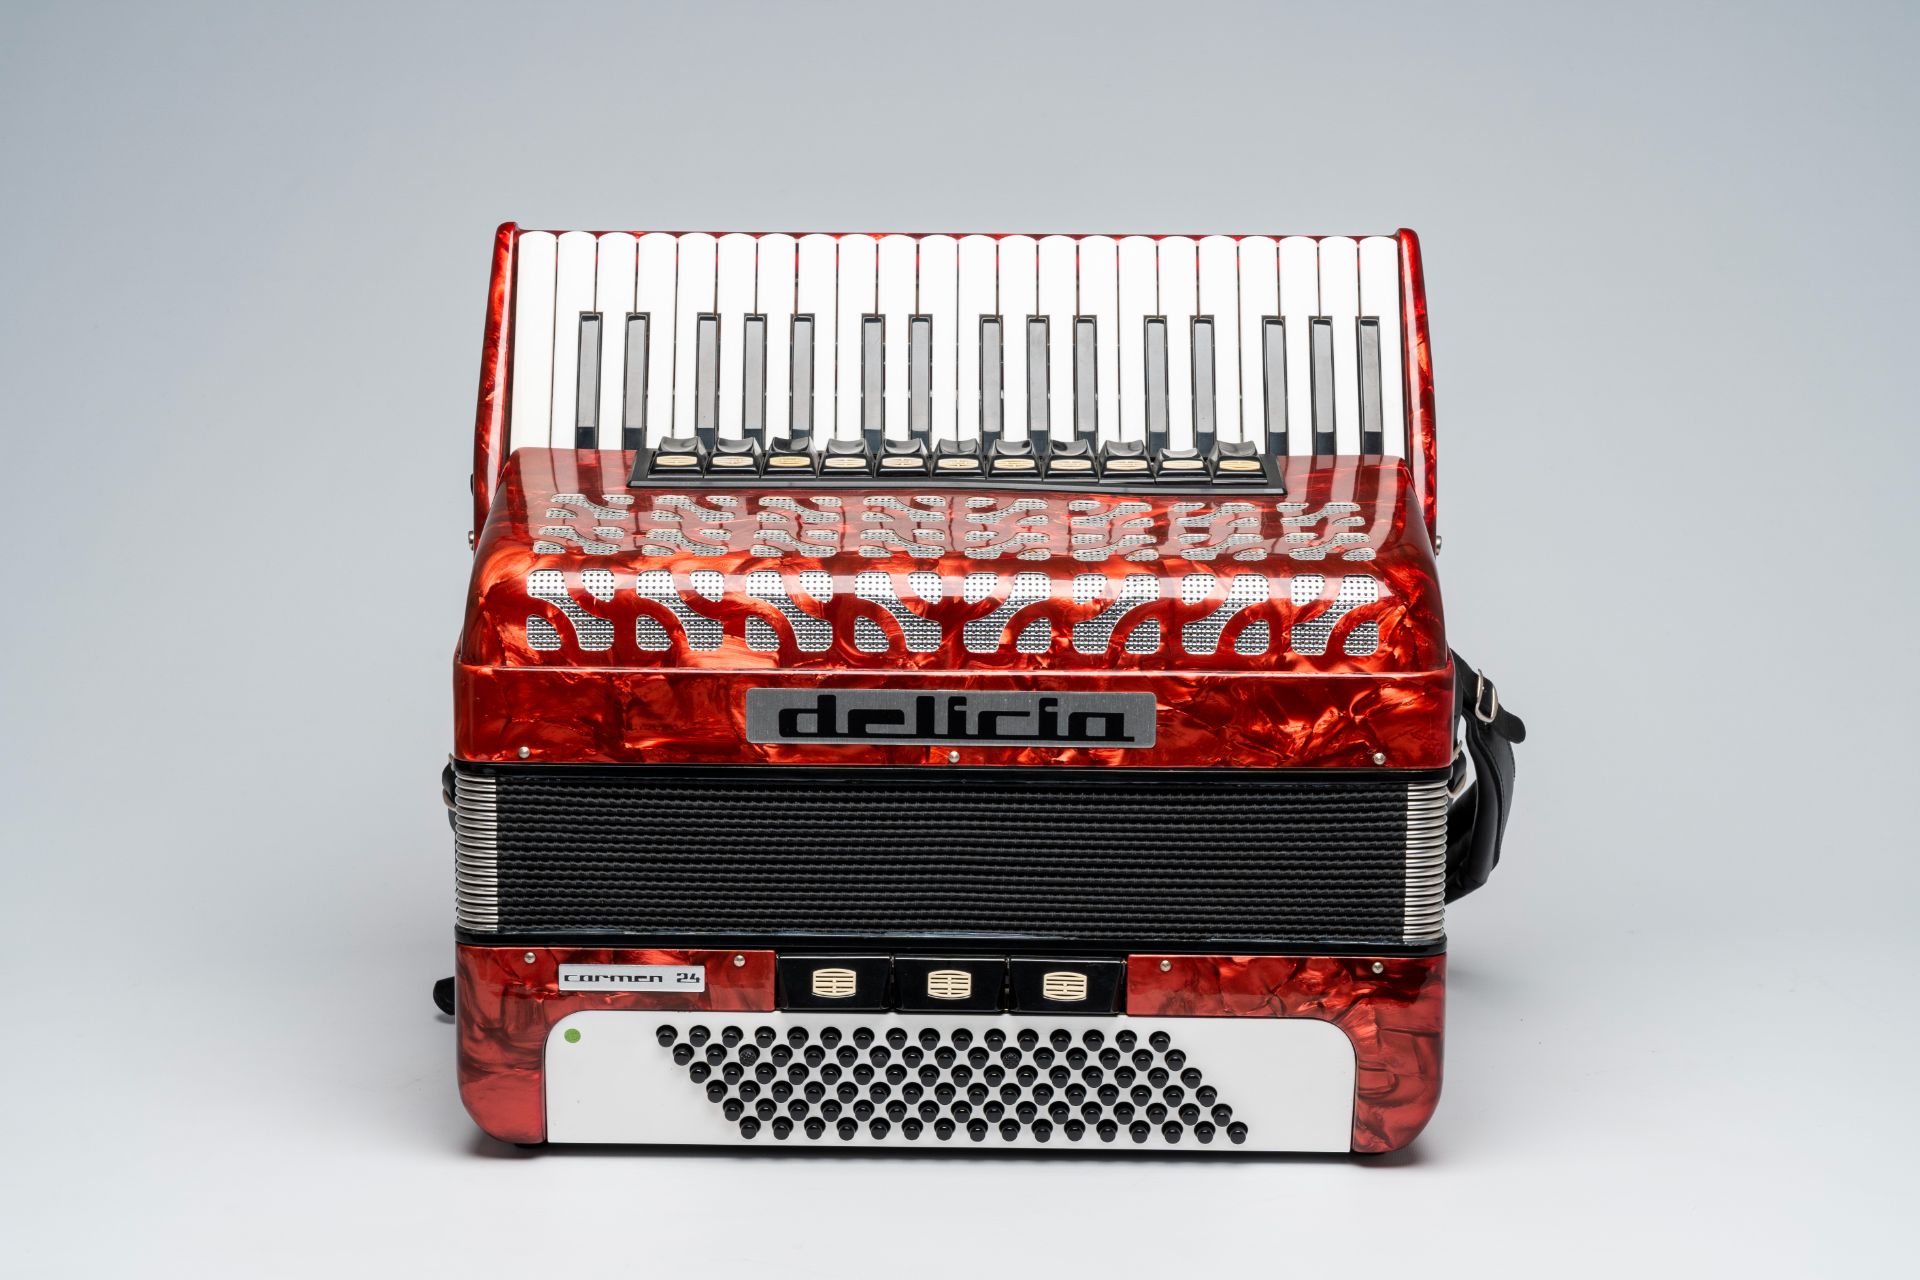 A Czech 'Delicia' chromatic accordion with piano keyboard and box, ca. 1990 - Image 3 of 6